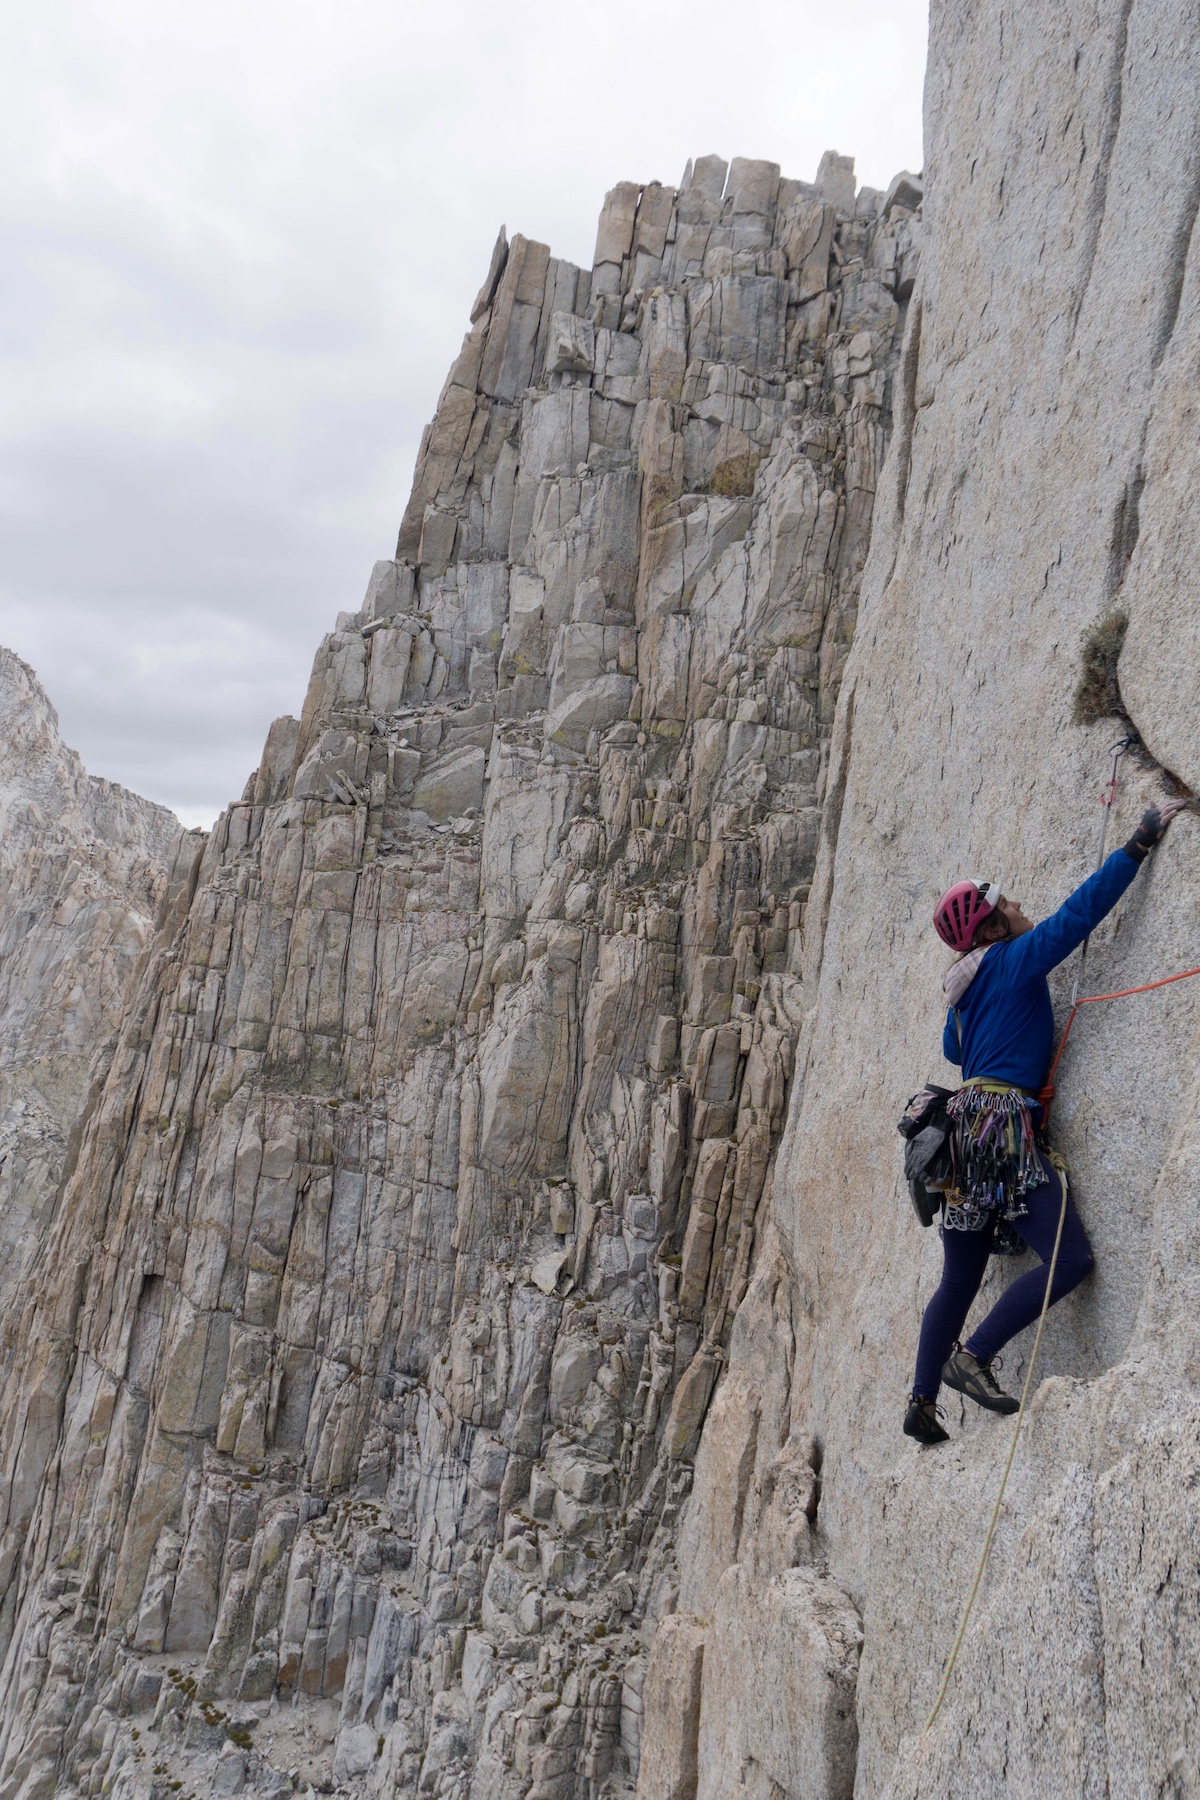 Whitney Clark wears the Patagonia Nano-Air Light Hoody while leading a pitch on the first ascent of High Fashion (5.10, 1,000') on a peak near Wales Lake in the Sierra Nevada Range. The team found a tiny pill container that contained a summit register and identified the mountain as Wales Lake Peak. The register only had two ascents from teams who walked up the backside, Clark said. [Photo] Tad McCrea